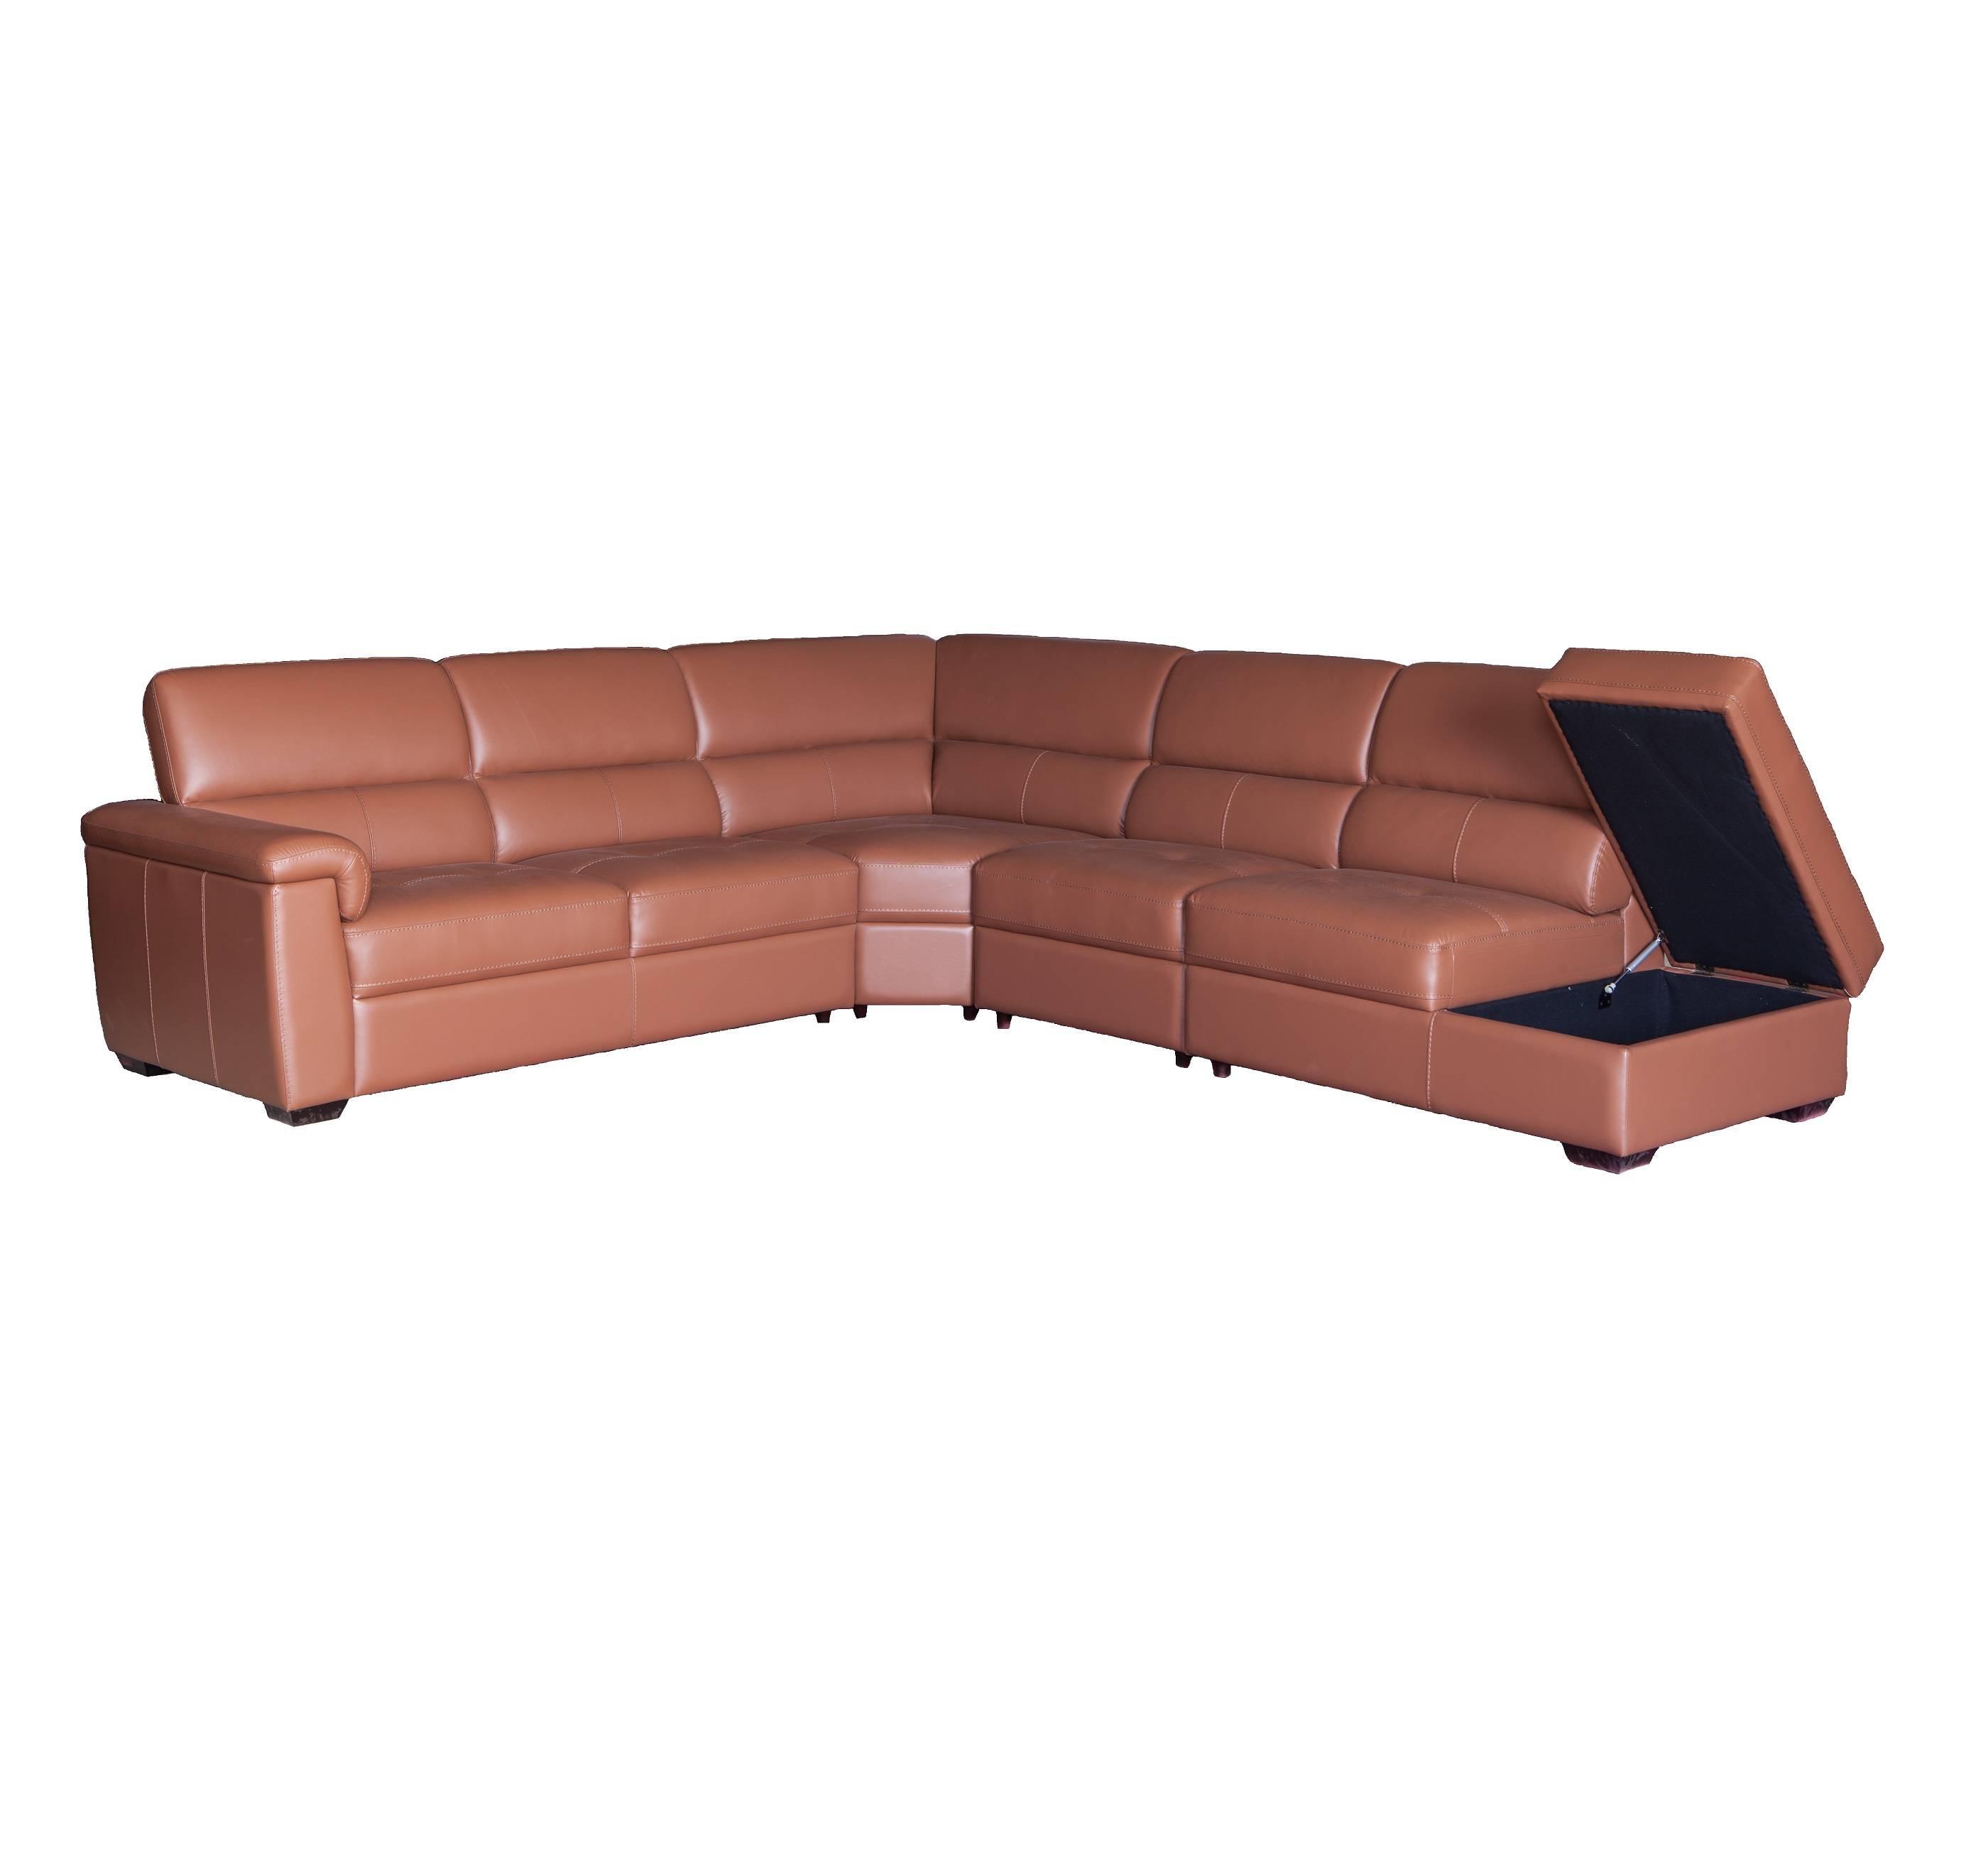 Discount Price 5 Seater Fabric Recliner Sofas - New design brown leather 6 seater l shape sectional sofa set – Chuan Yang